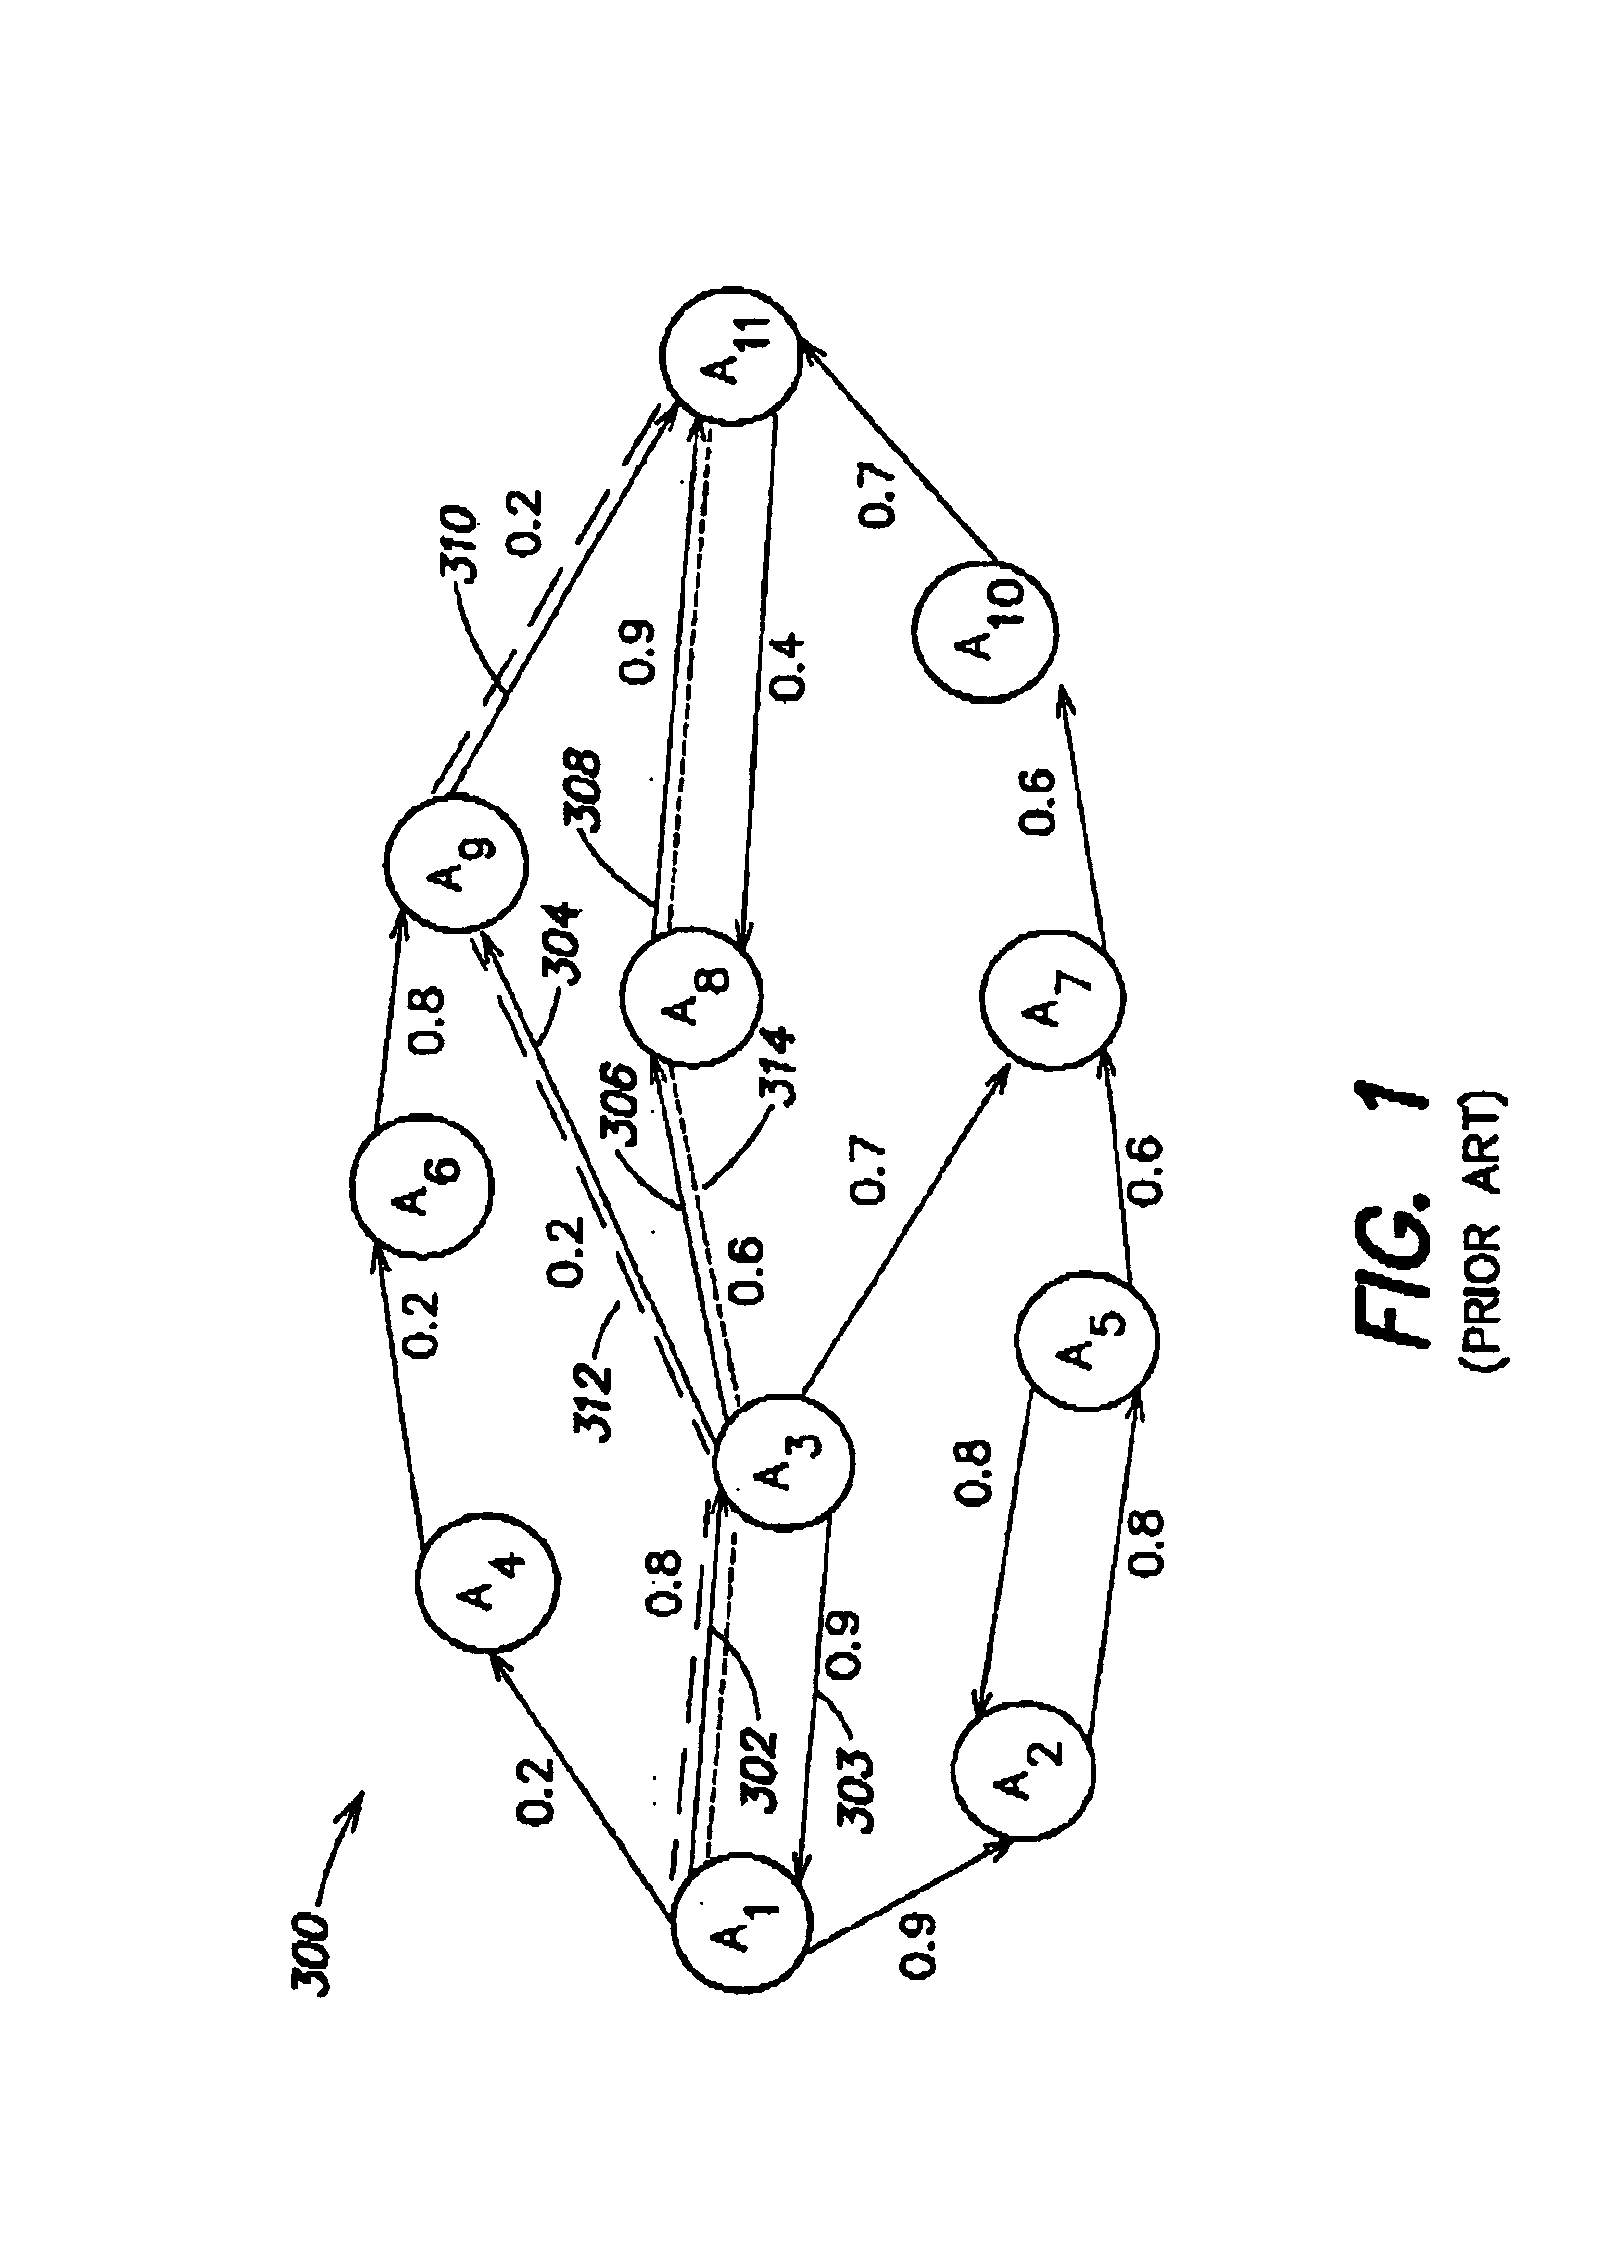 Method and system for ascribing a reputation to an entity as a rater of other entities